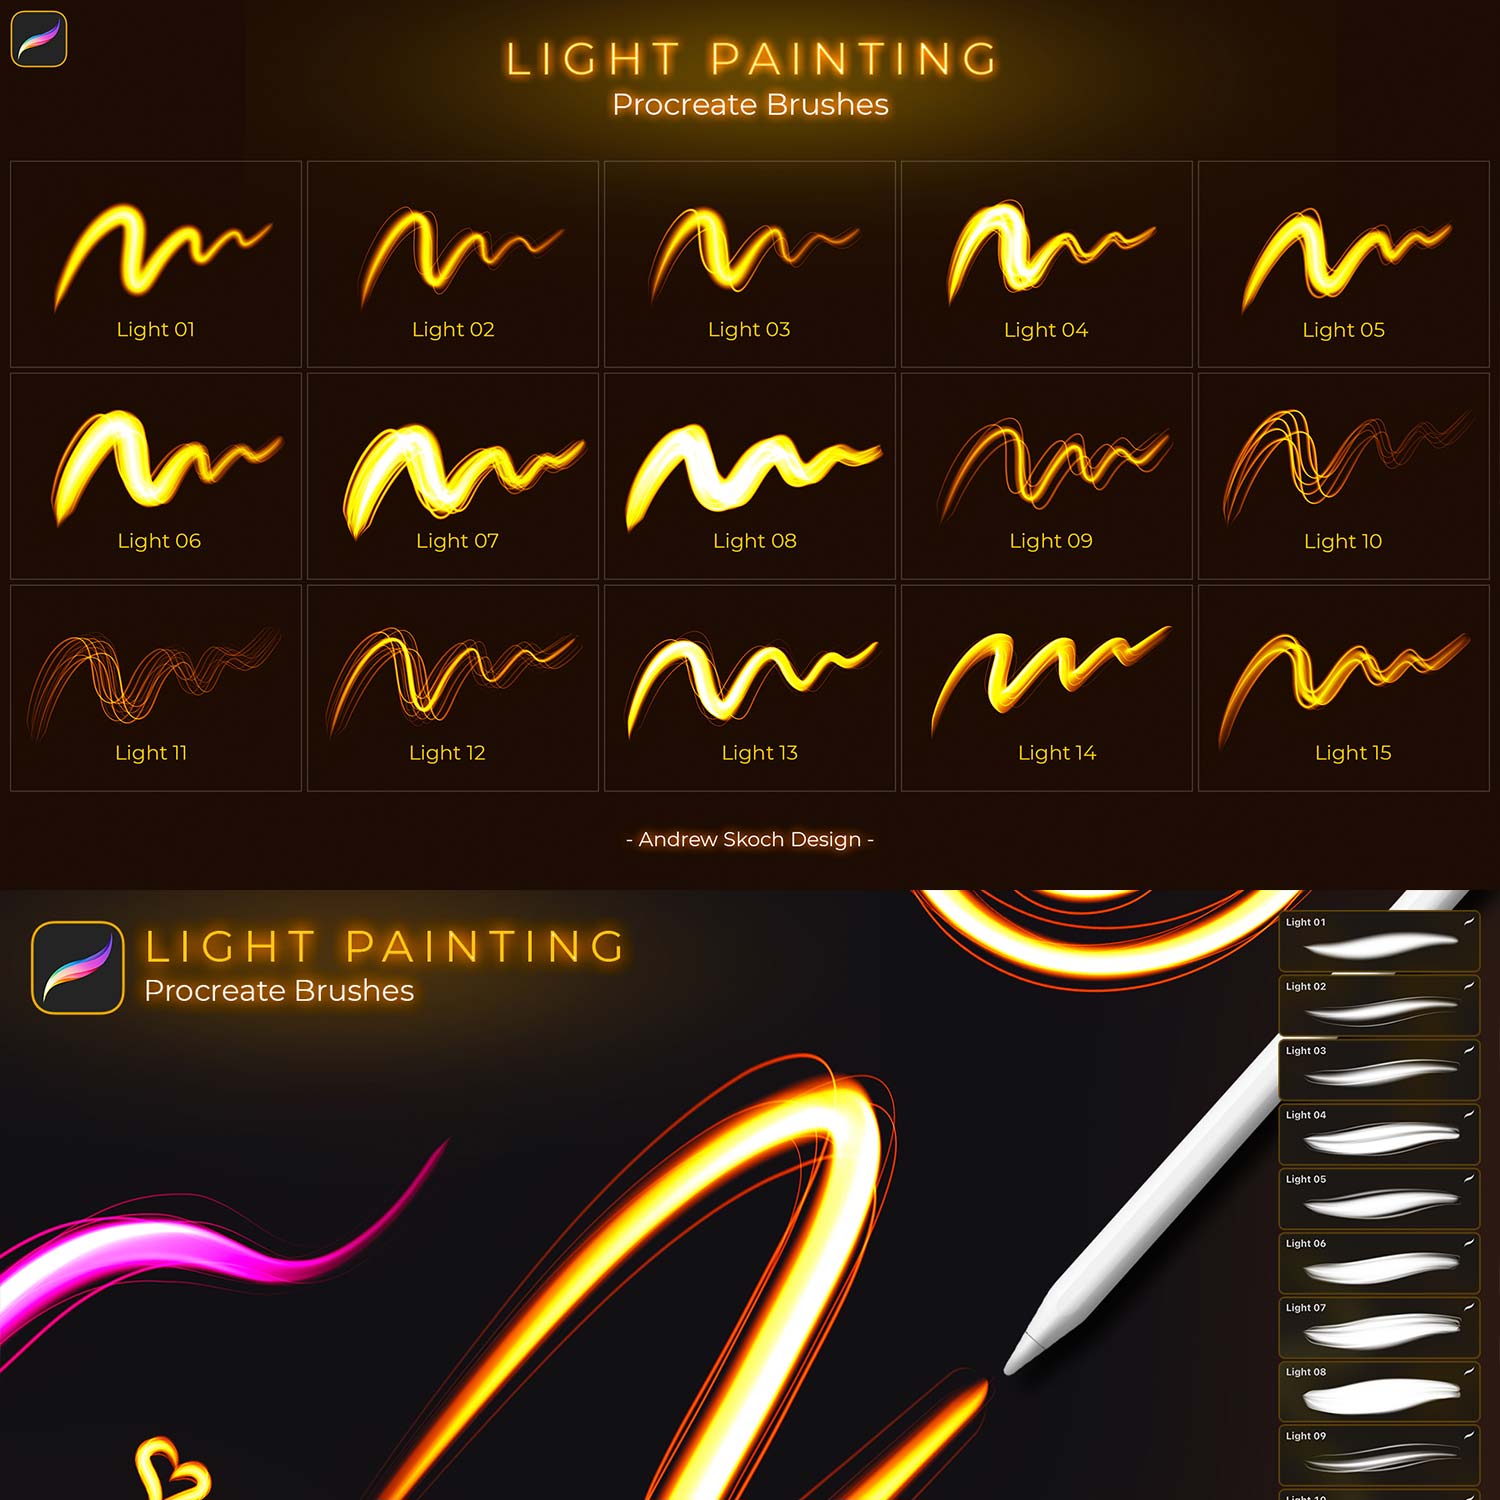 Light Painting Procreate Brushes preview image.